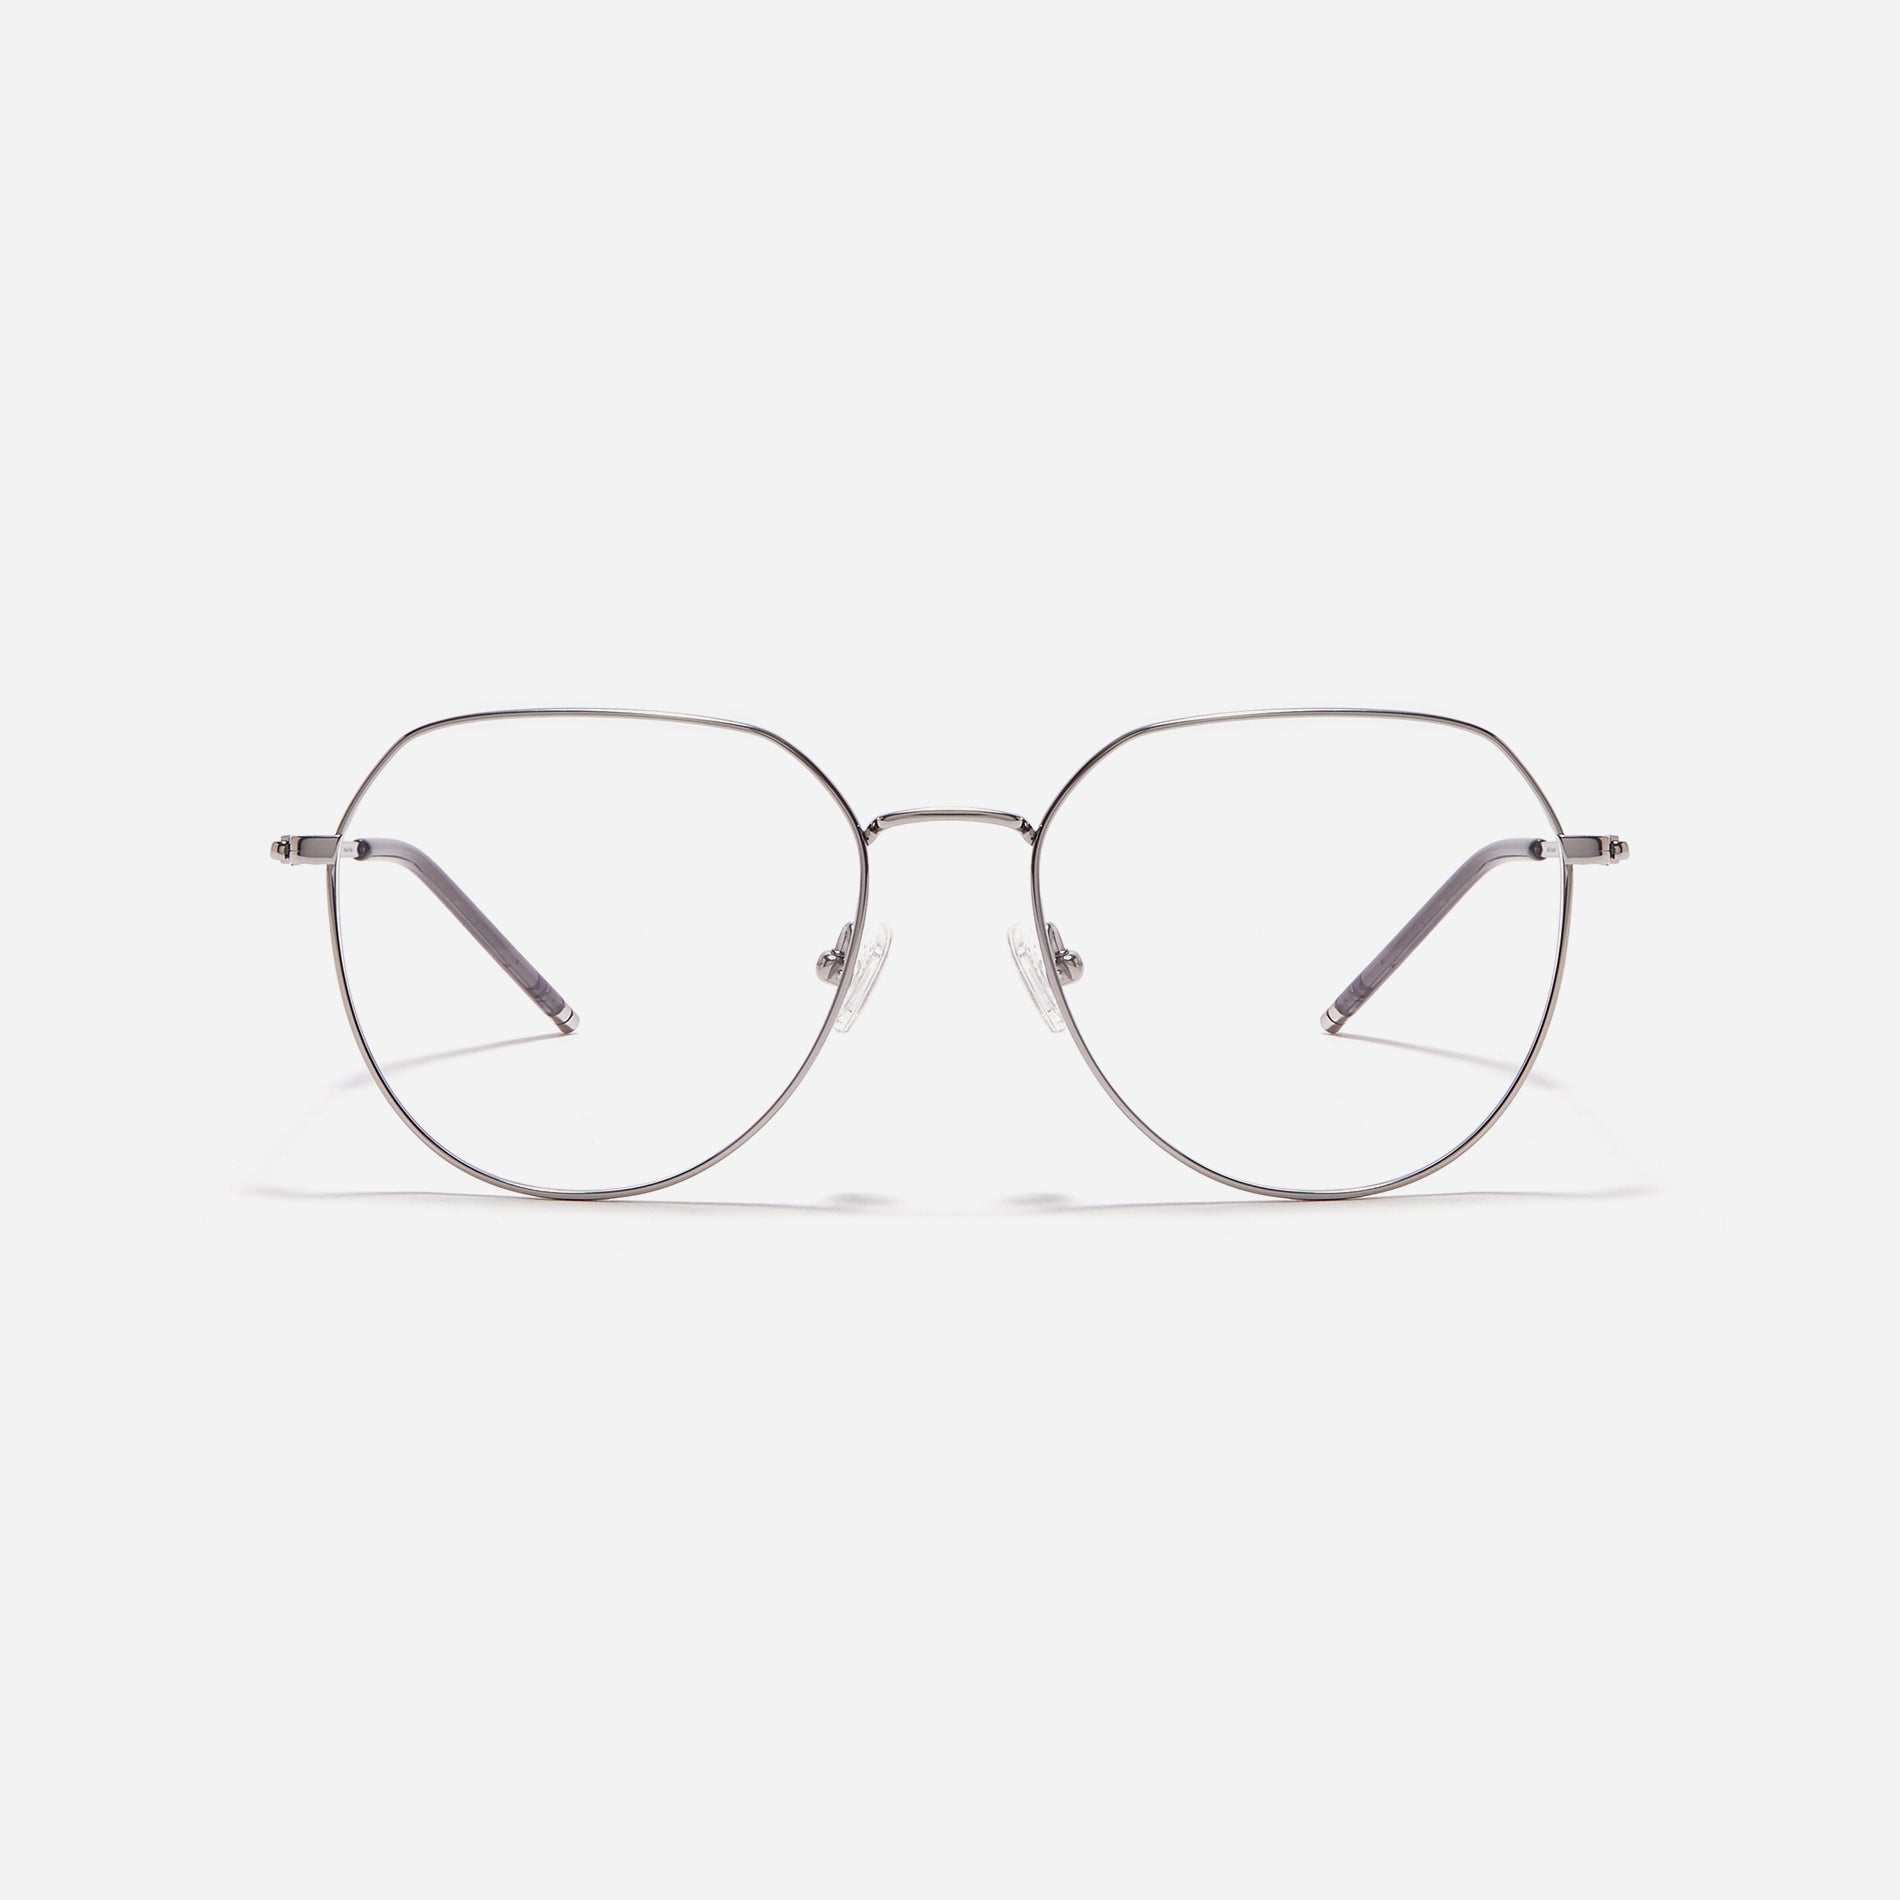 Boeing-style oversized eyeglasses crafted entirely from titanium for a lighter and more comfortable fit. With classic color options and frame design, these eyeglasses offer a retro style that effortlessly complements one's look.